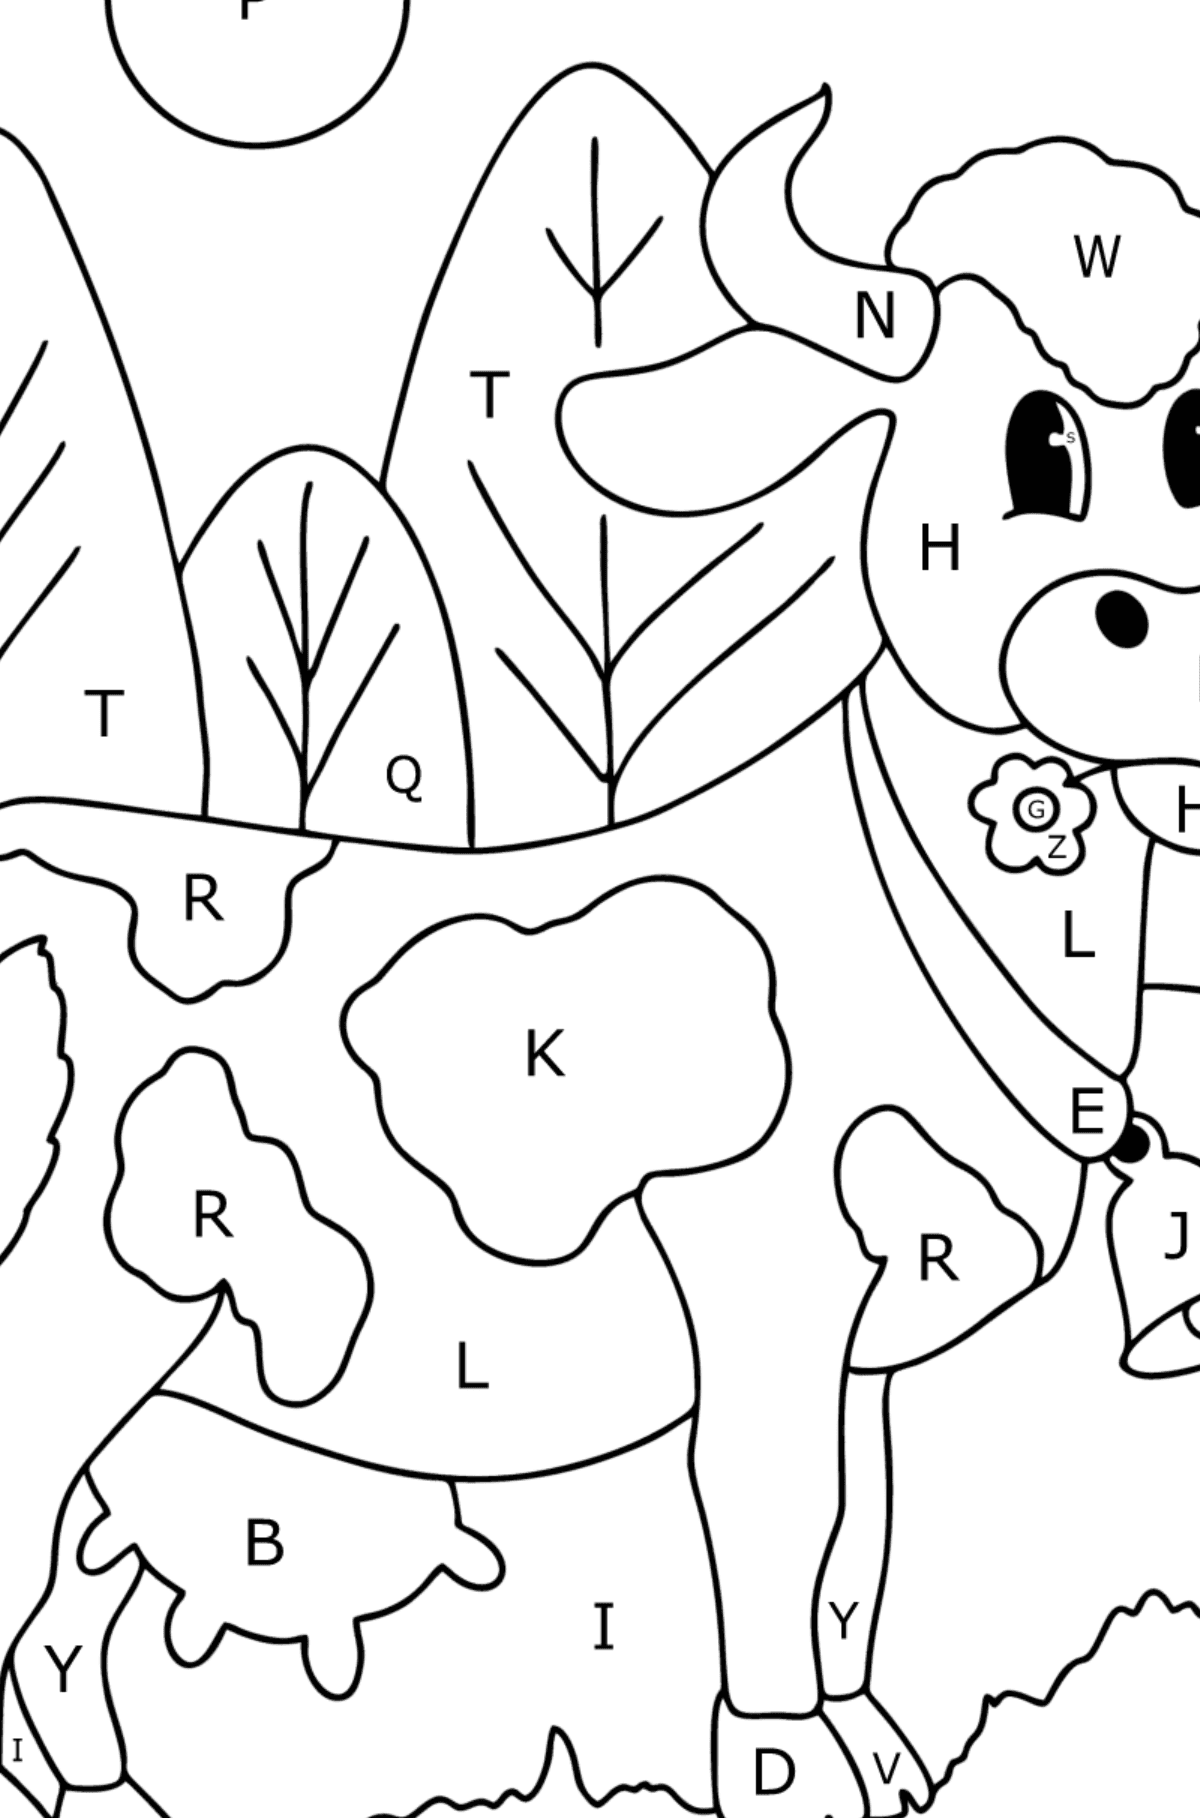 Realistic cow coloring page - Coloring by Letters for Kids